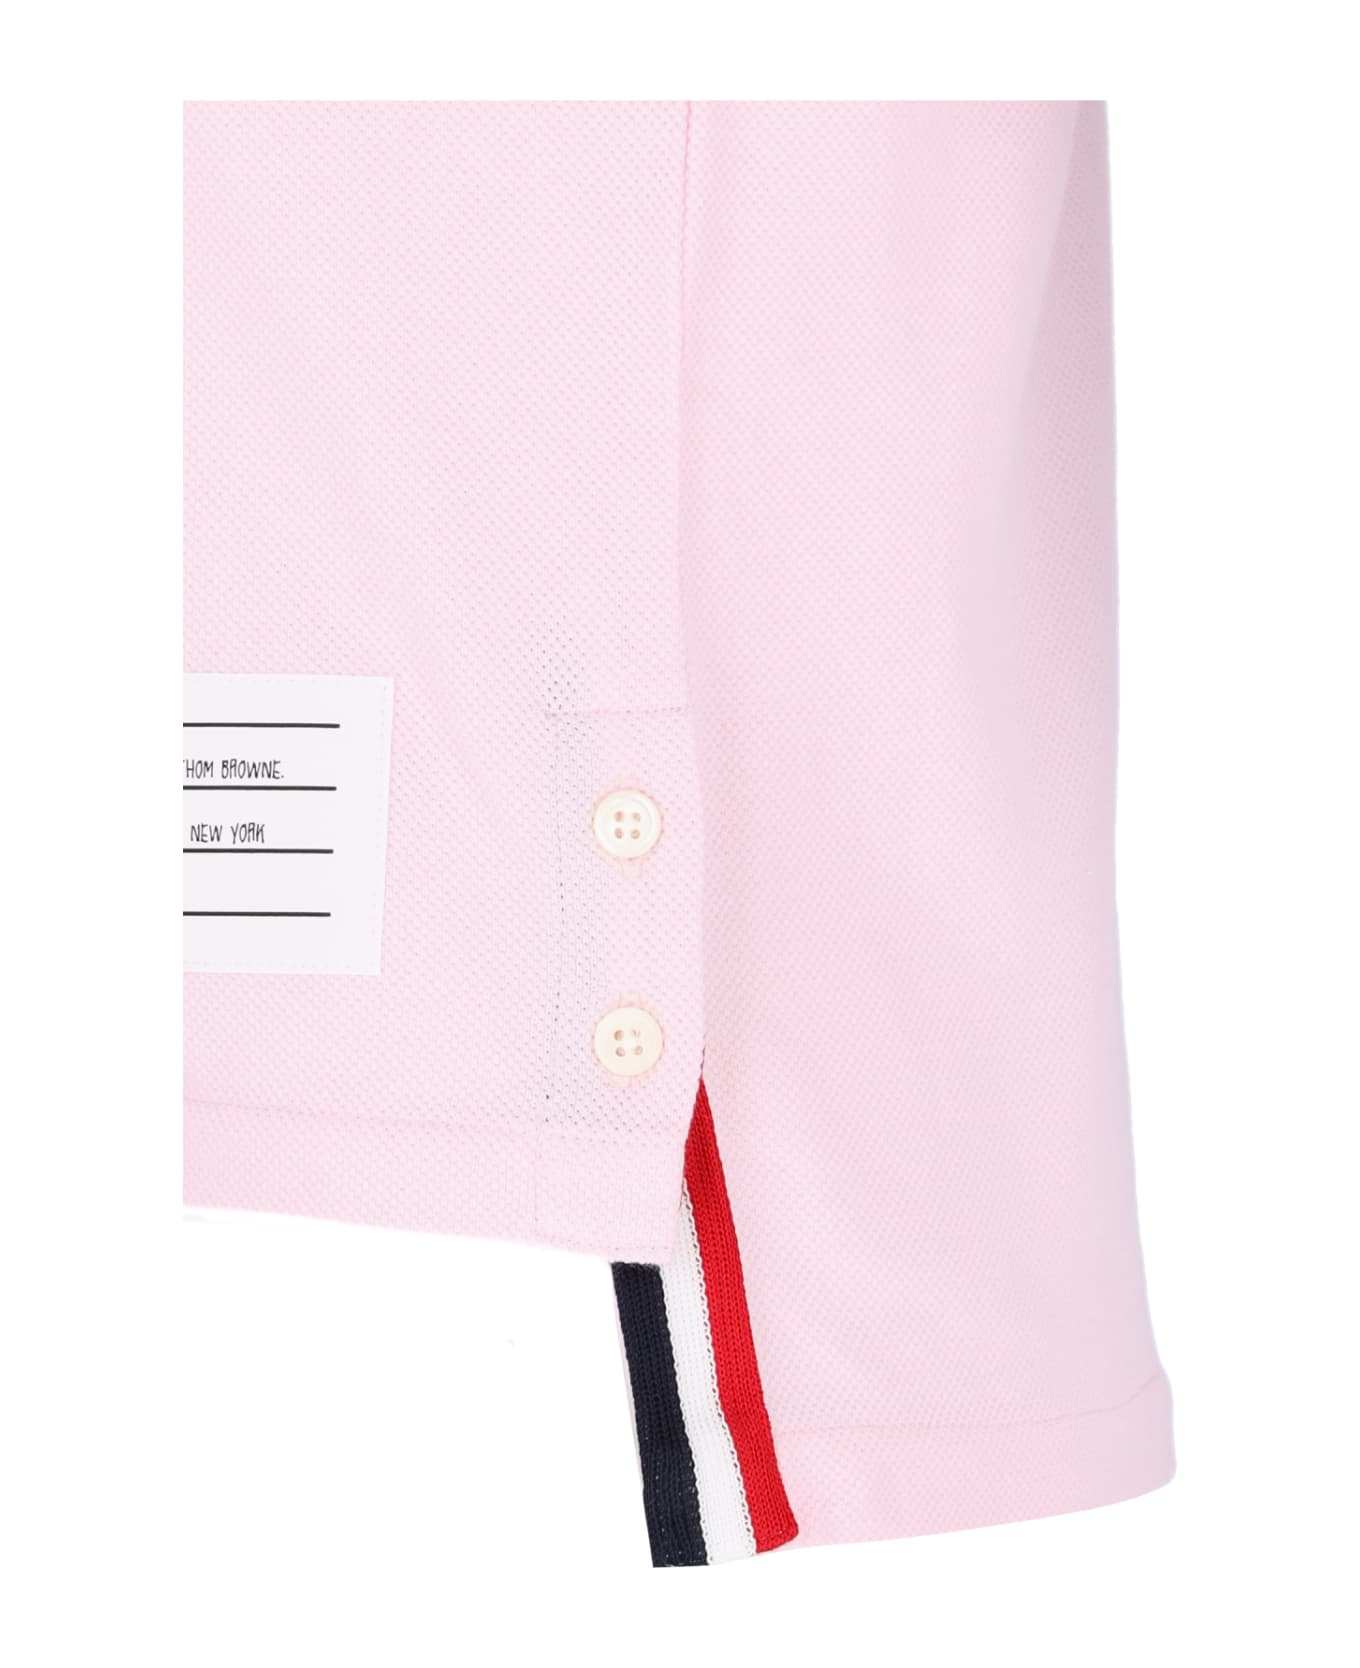 Thom Browne Tricolor Detail T-shirt On The Back - Pink